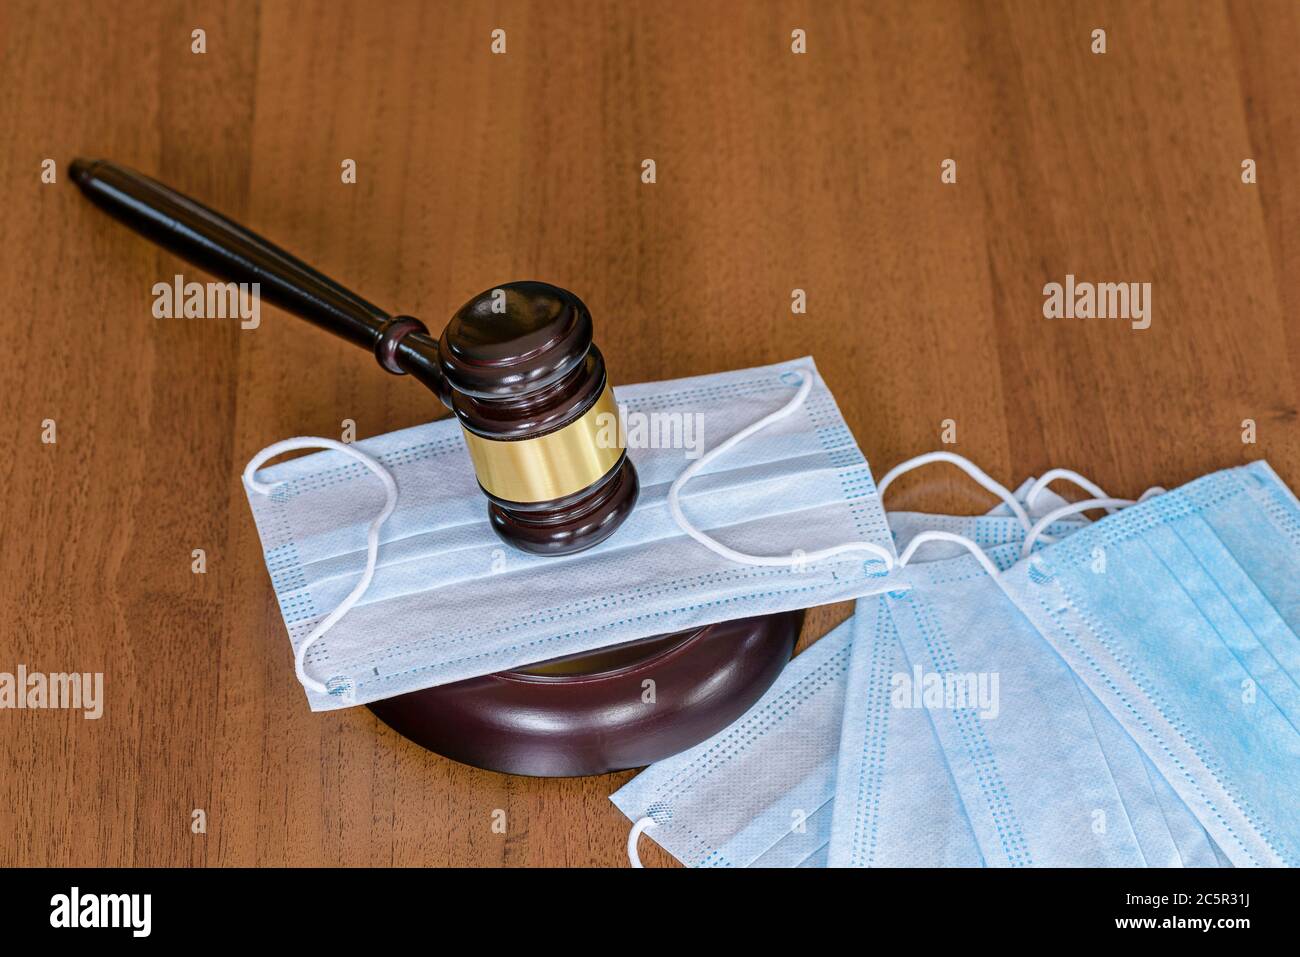 Trial of medical workers. Judicial hammer lies on medical masks. Concept of mandatory wearing of medical masks during the flu season. Coronvirus contr Stock Photo